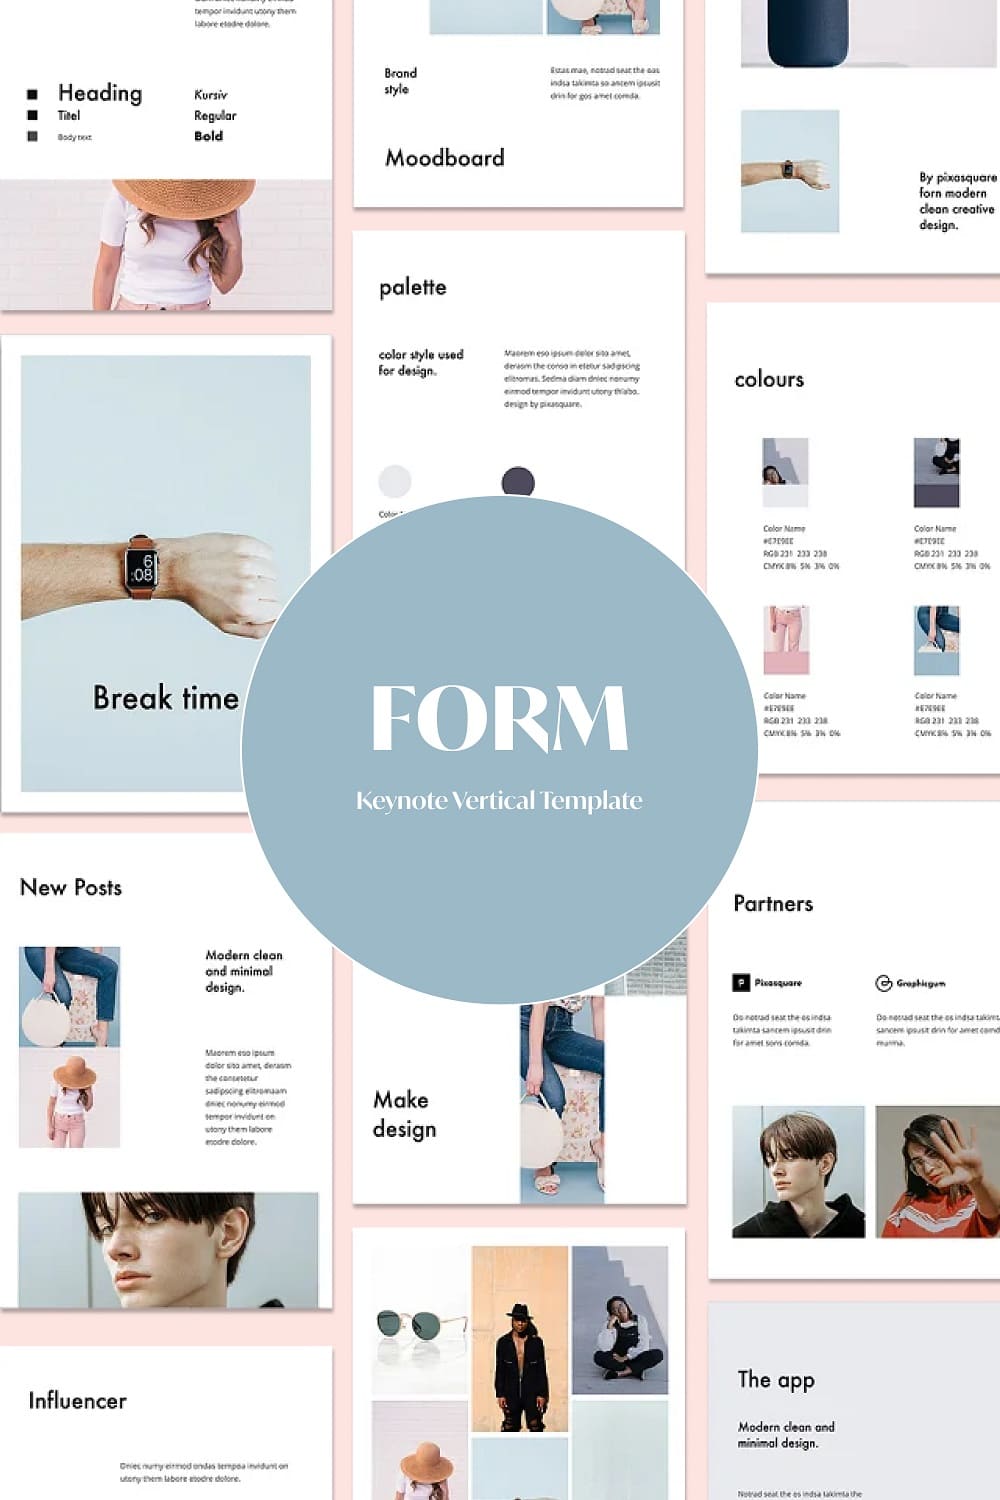 New design style of the Form Presentation Template.